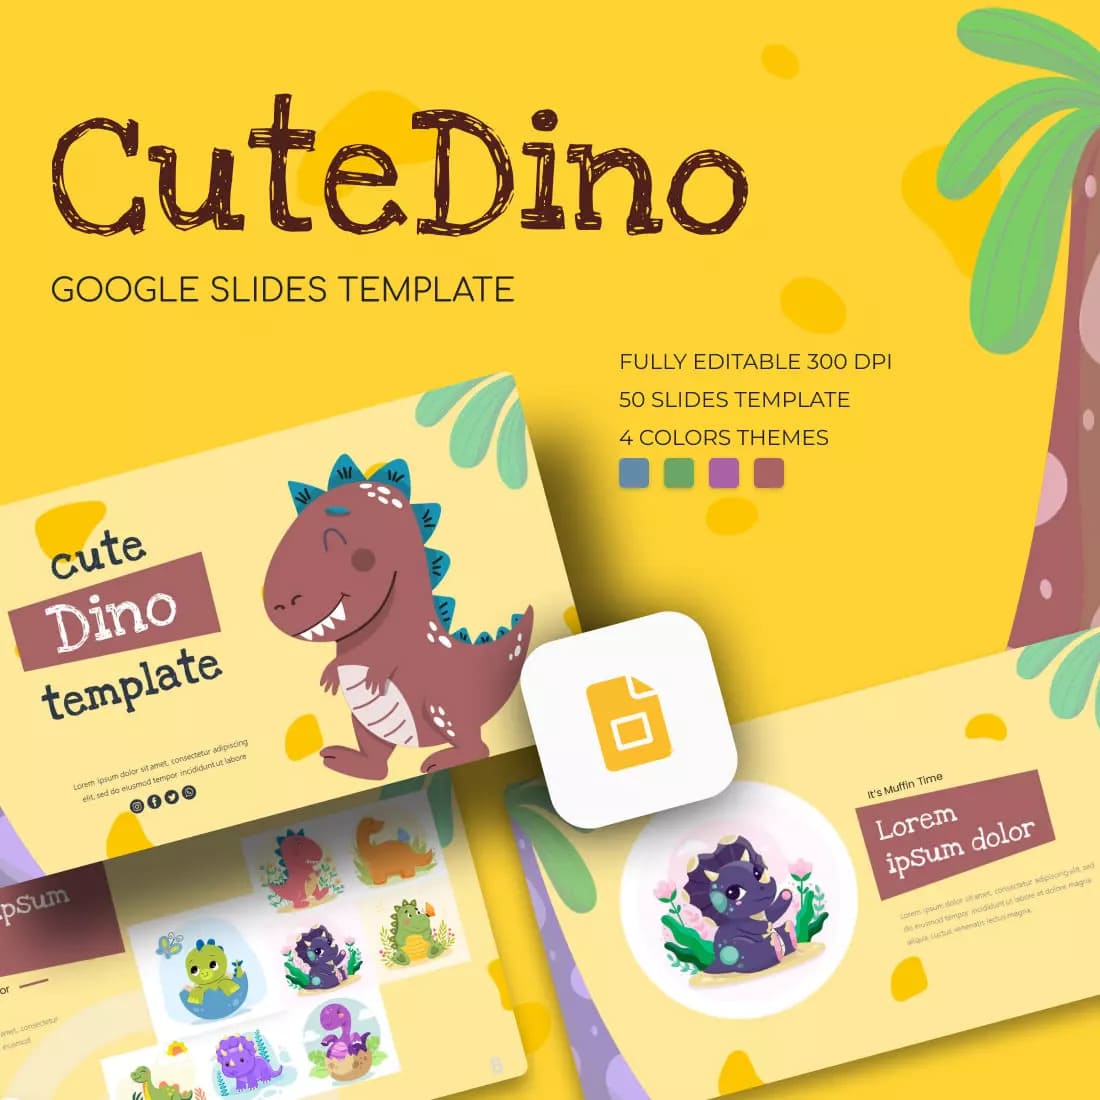 Cute Dino Google Slides Template Preview 6.